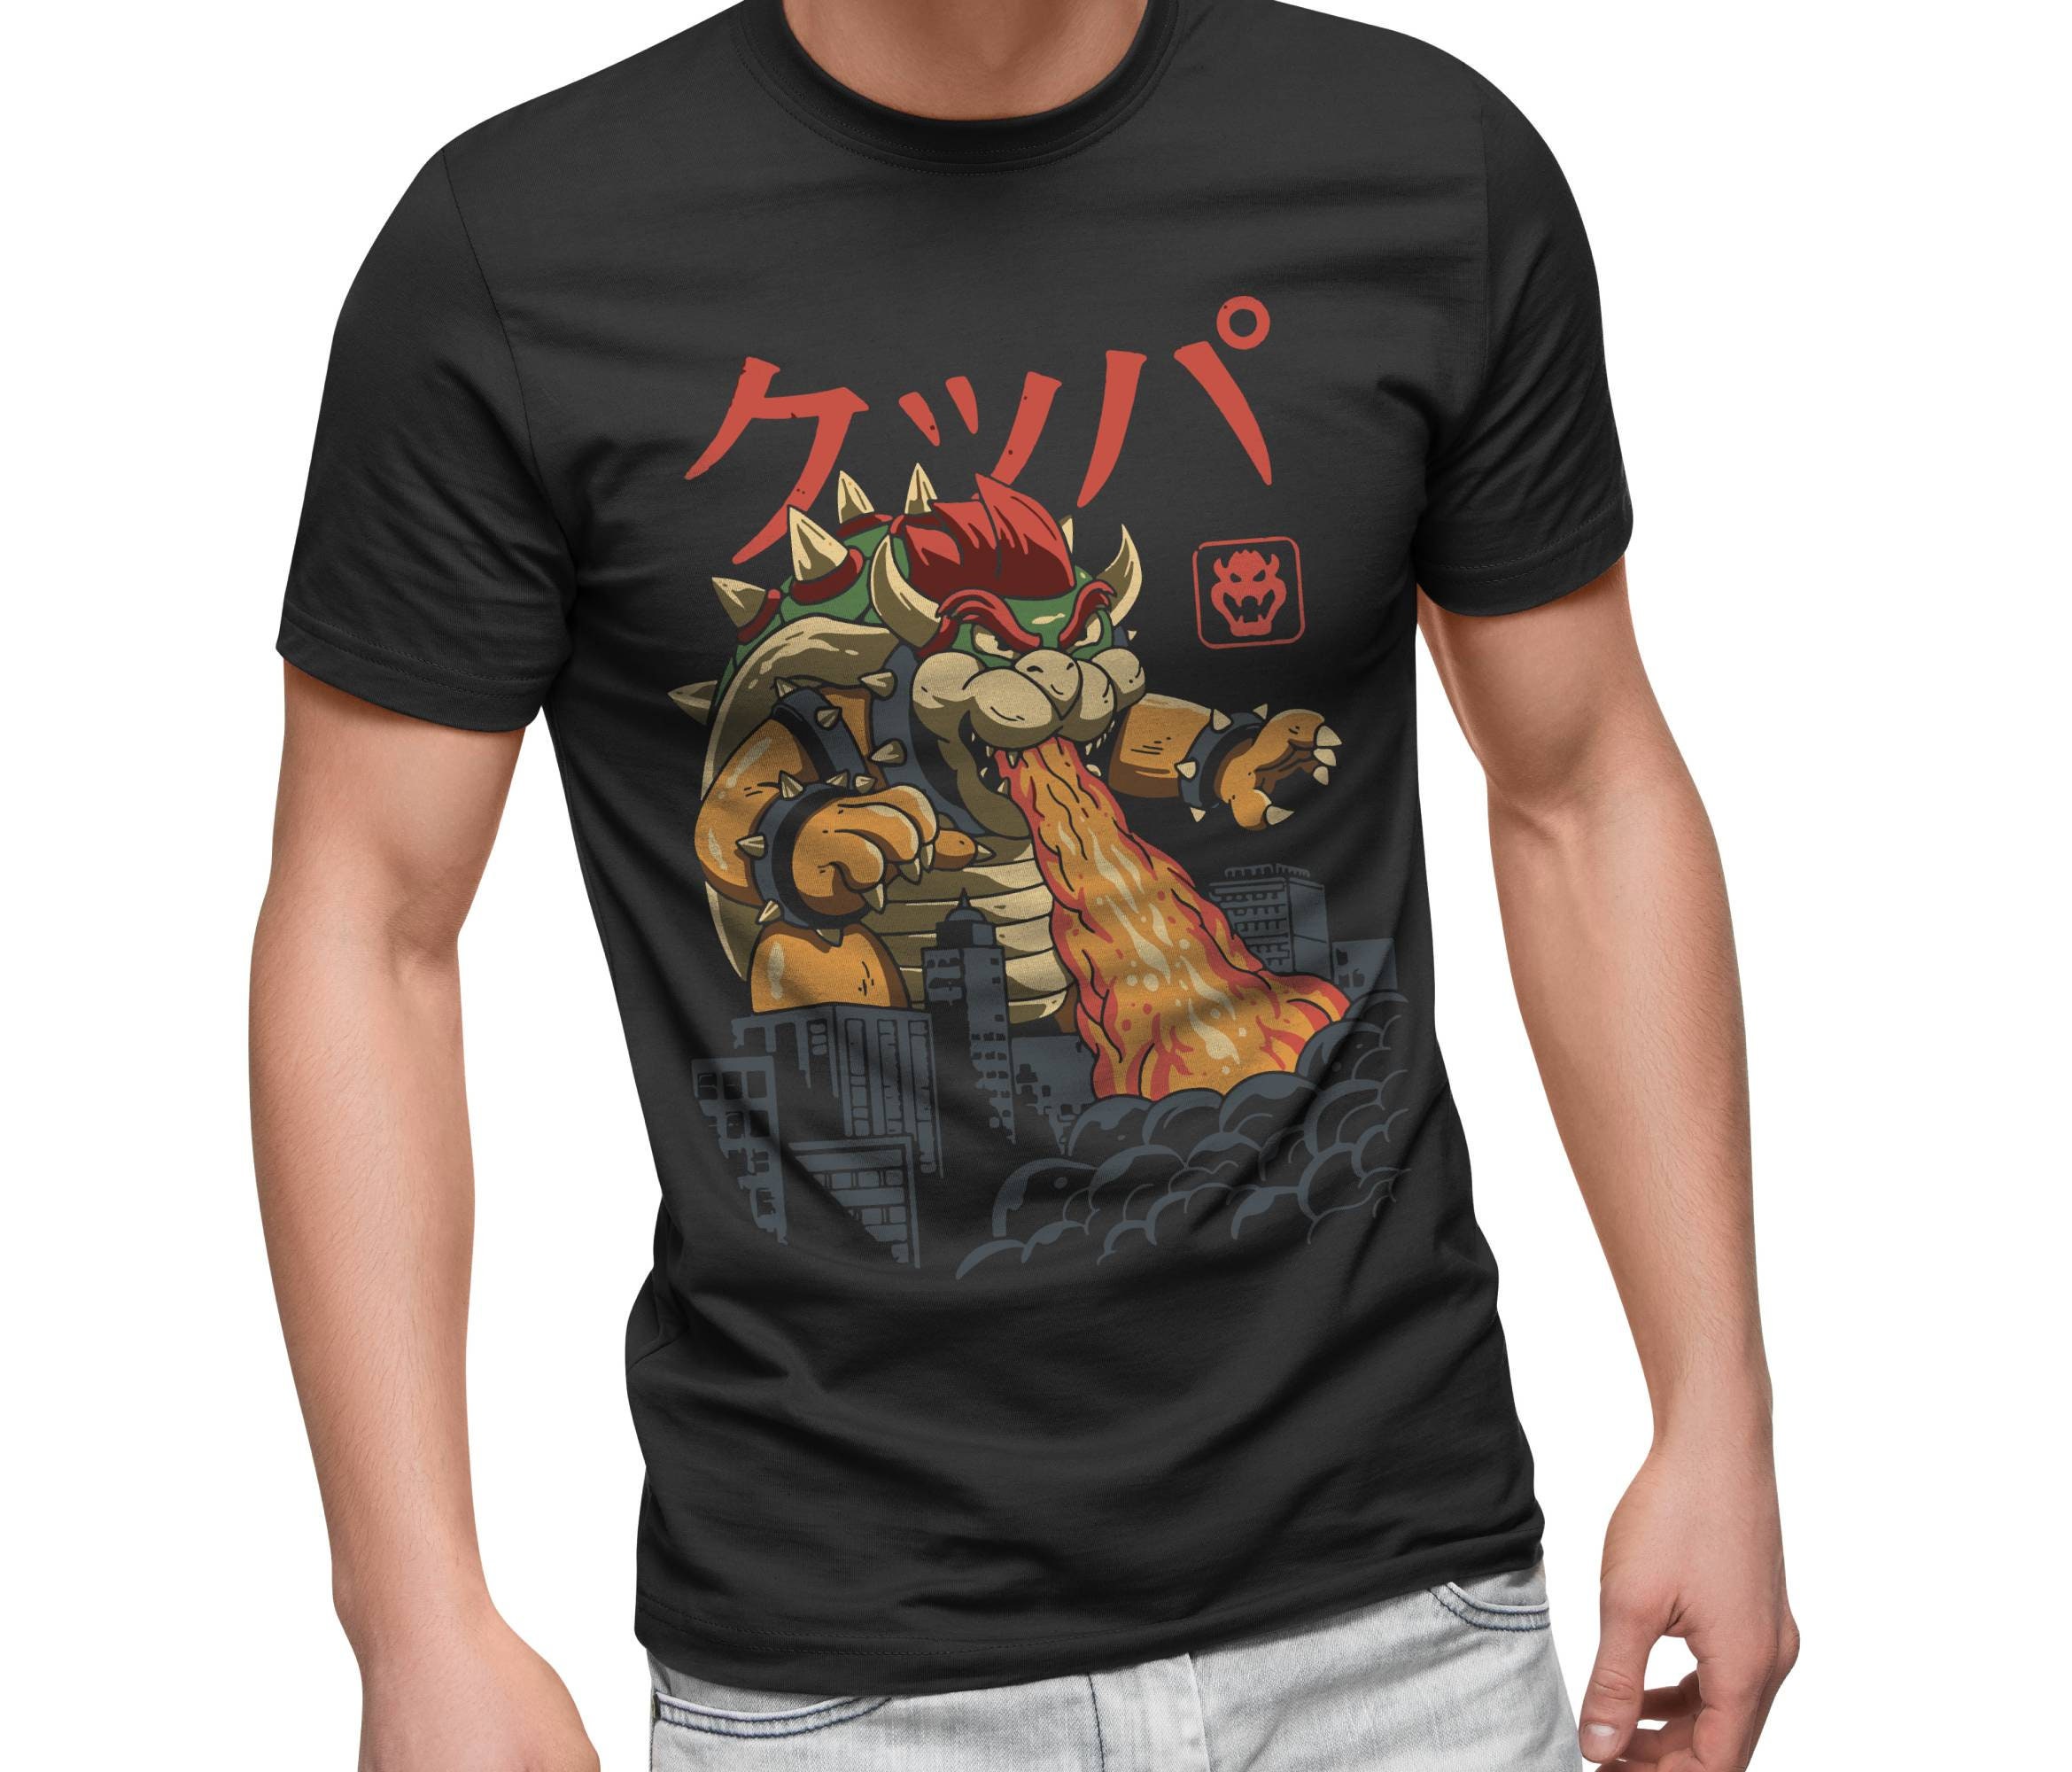 Discover Bowser Japanese Style T-Shirt | Movie Film Nerd Gaming Anime Novelty Funny | Men's Shirt | 100% Cotton Soft Feel Black Shirts